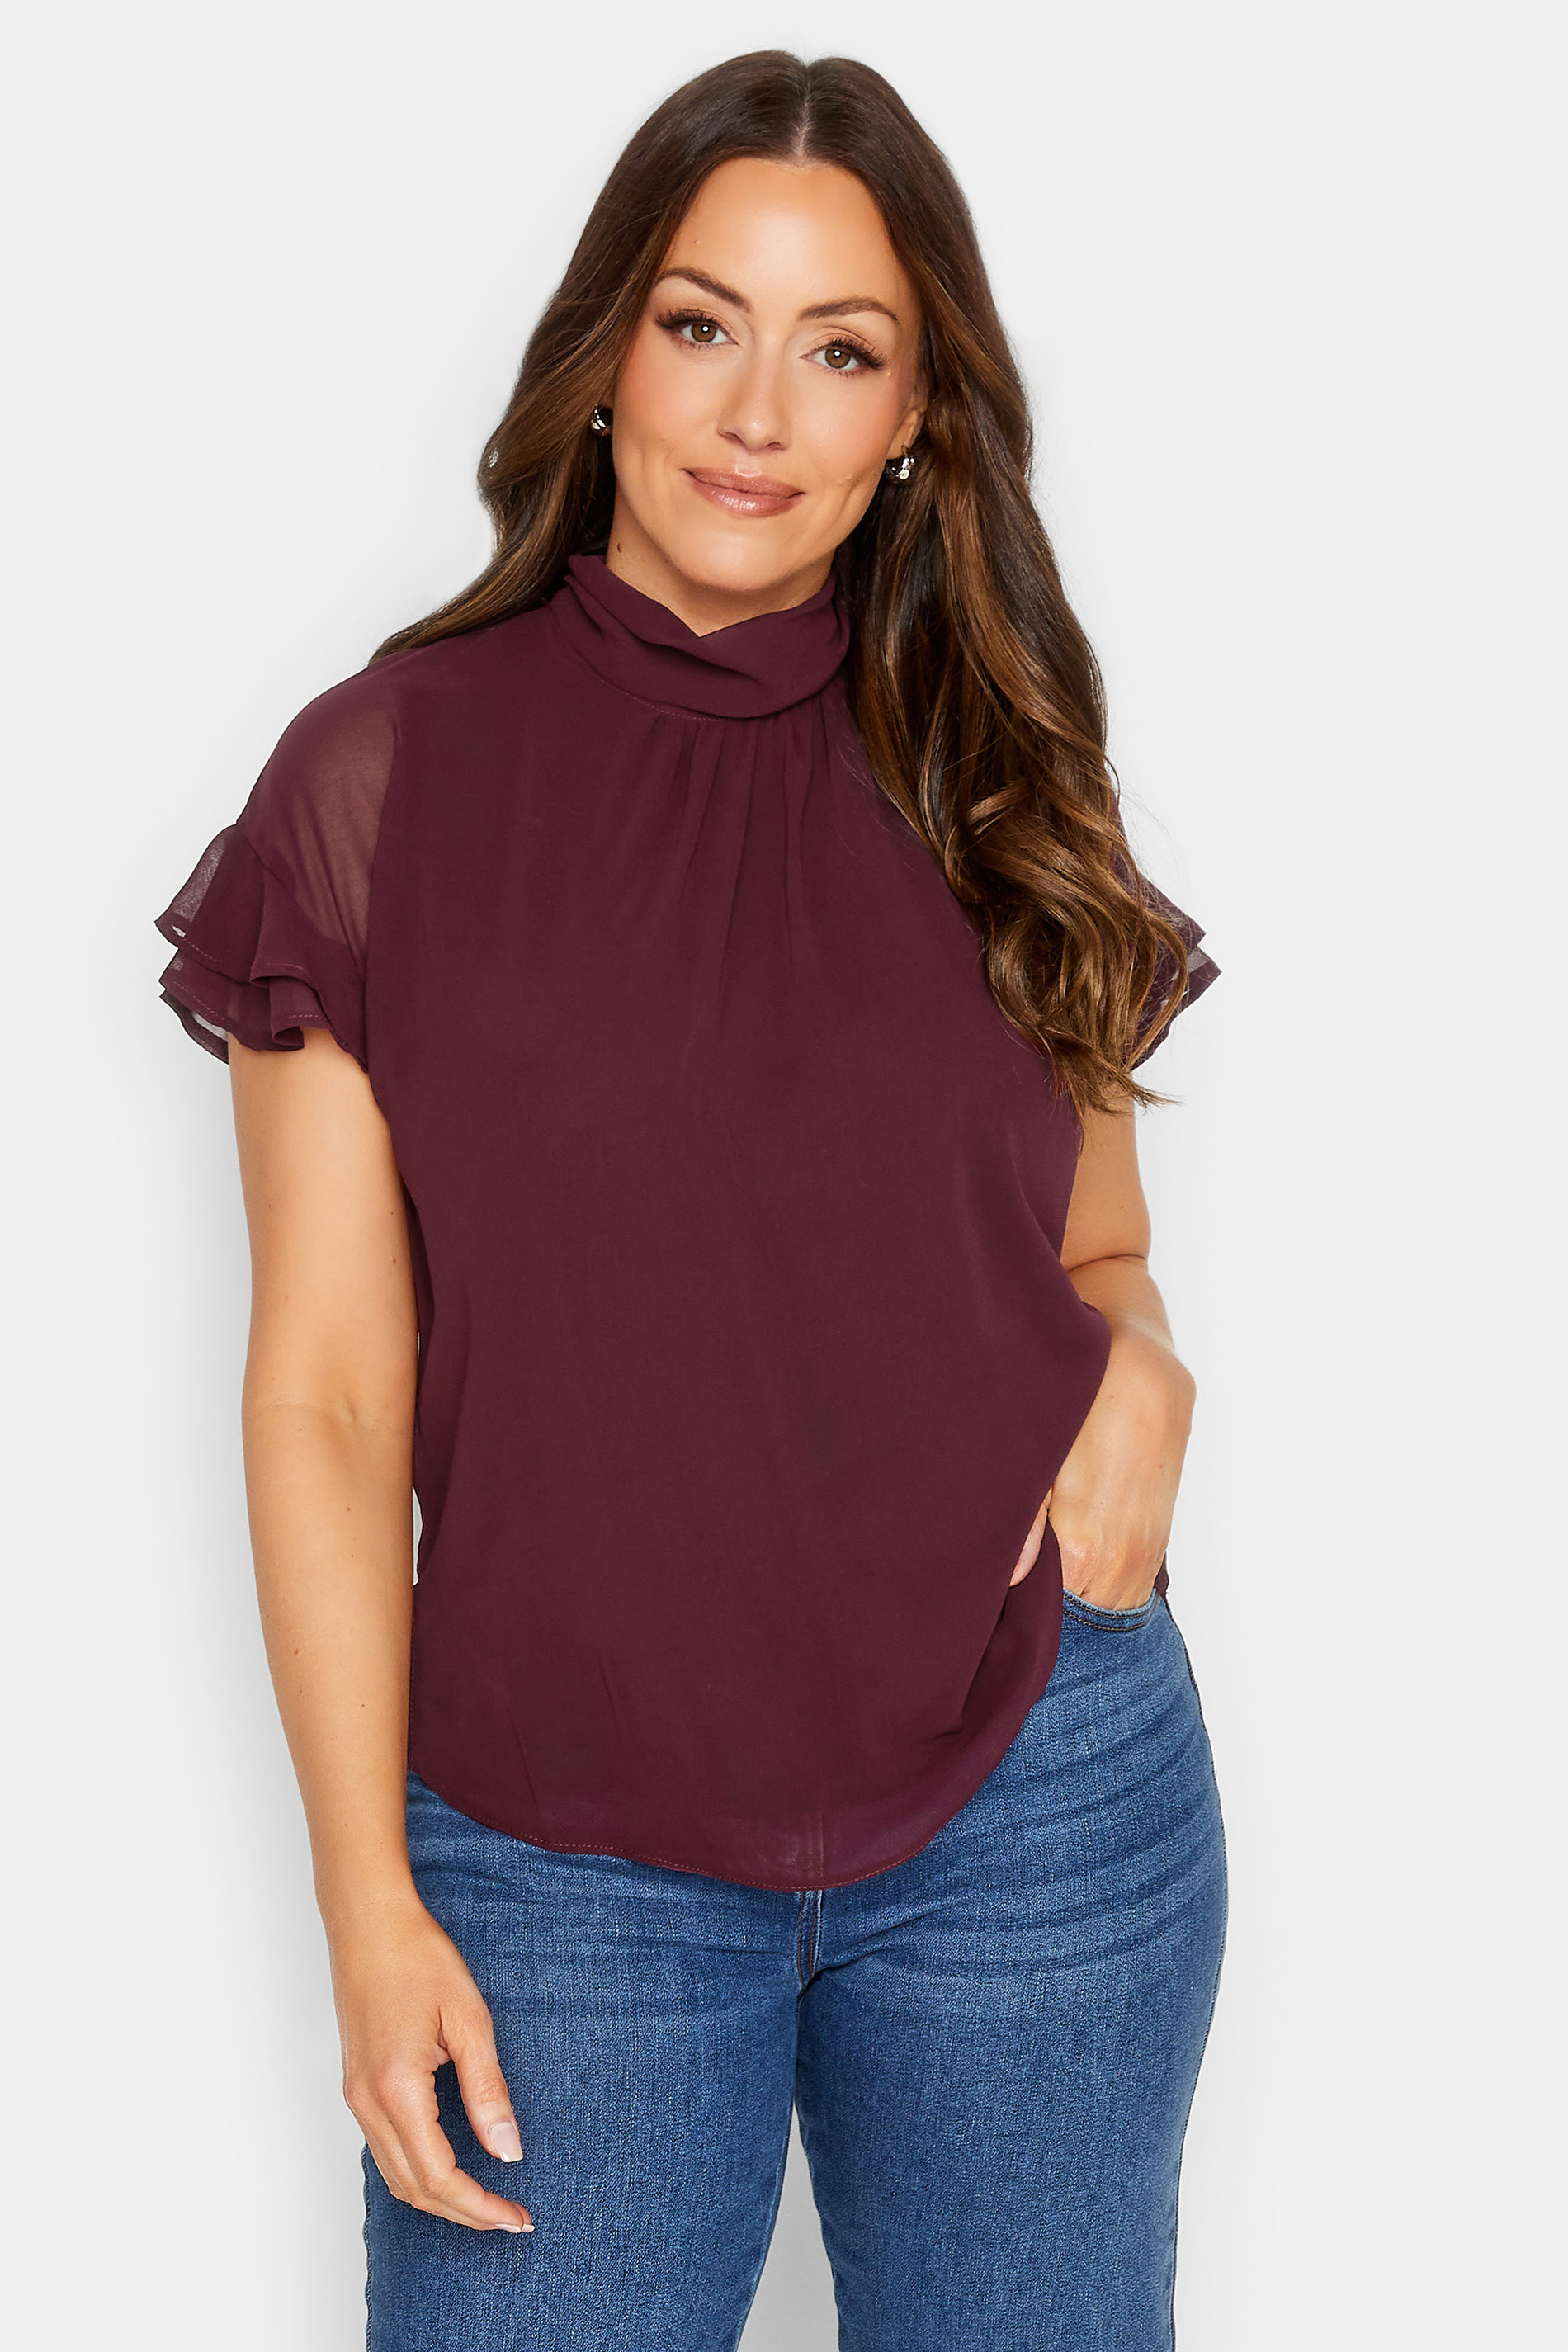 M&Co Dark Red High Neck Frill Sleeve Blouse | M&Co 1